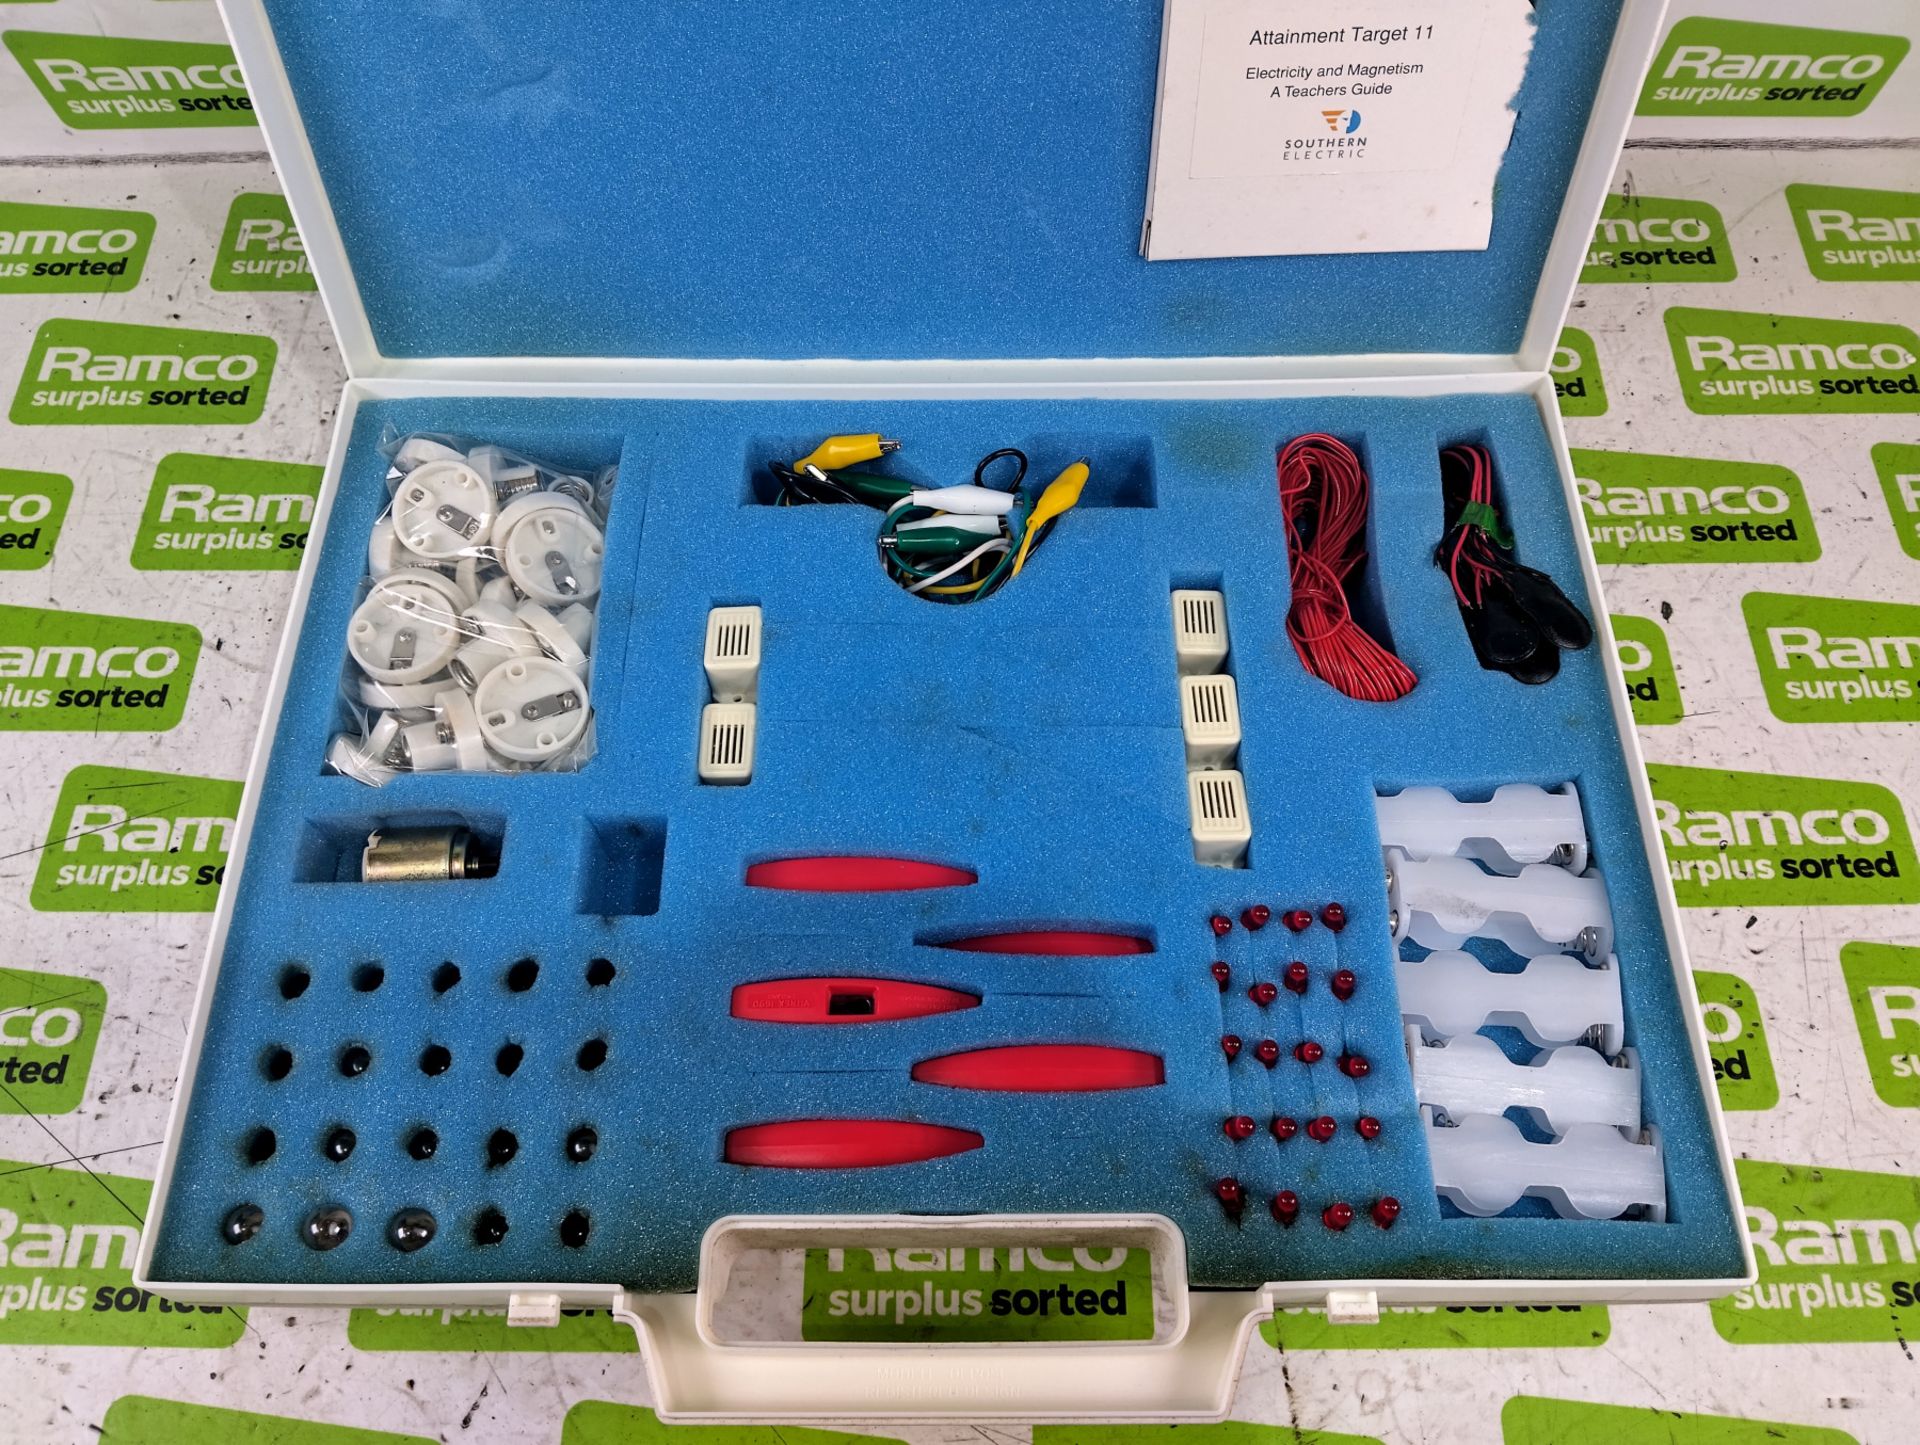 Southern Electric - The Electric Box - electronics kit for schools - Image 3 of 4